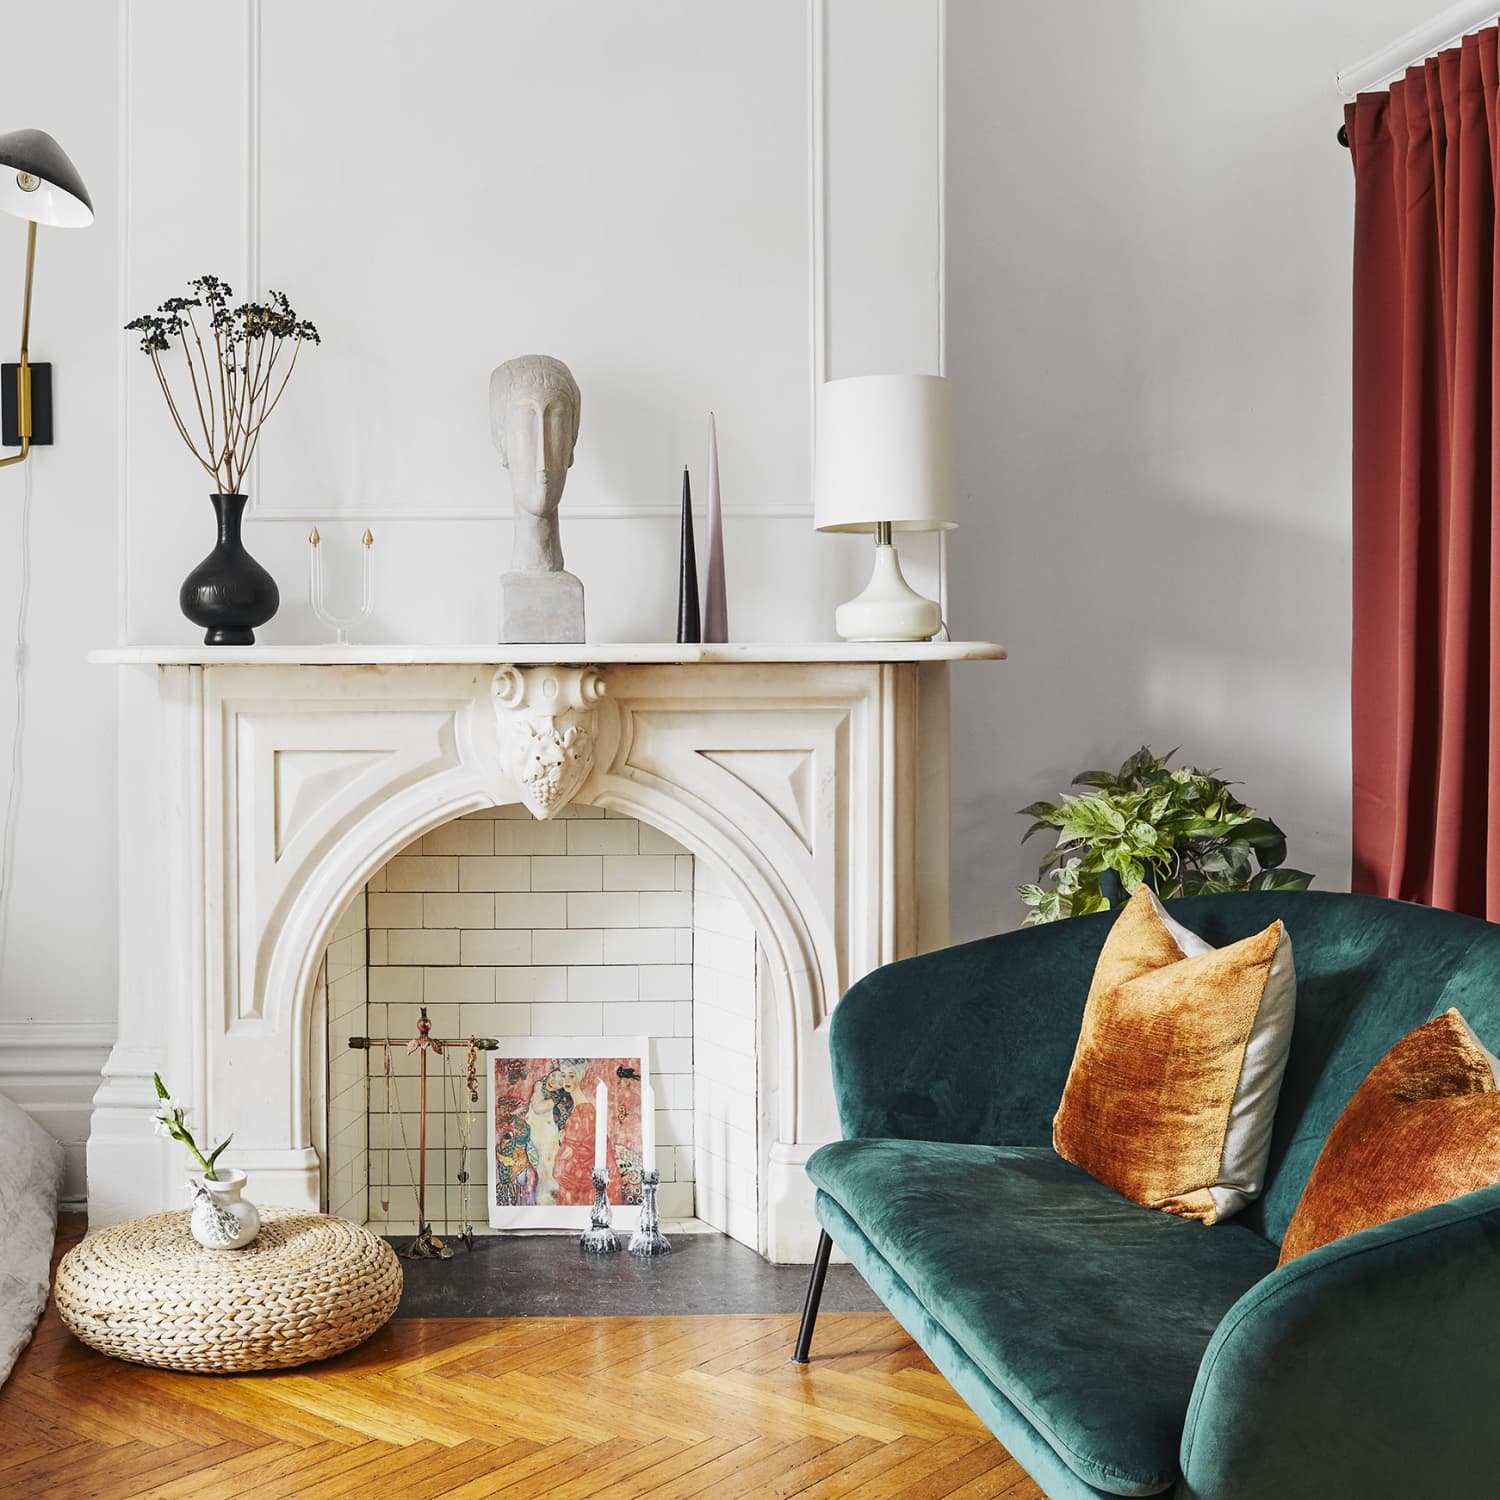 How to Get French Interior Design Style on an IKEA Budget, According to  Experts